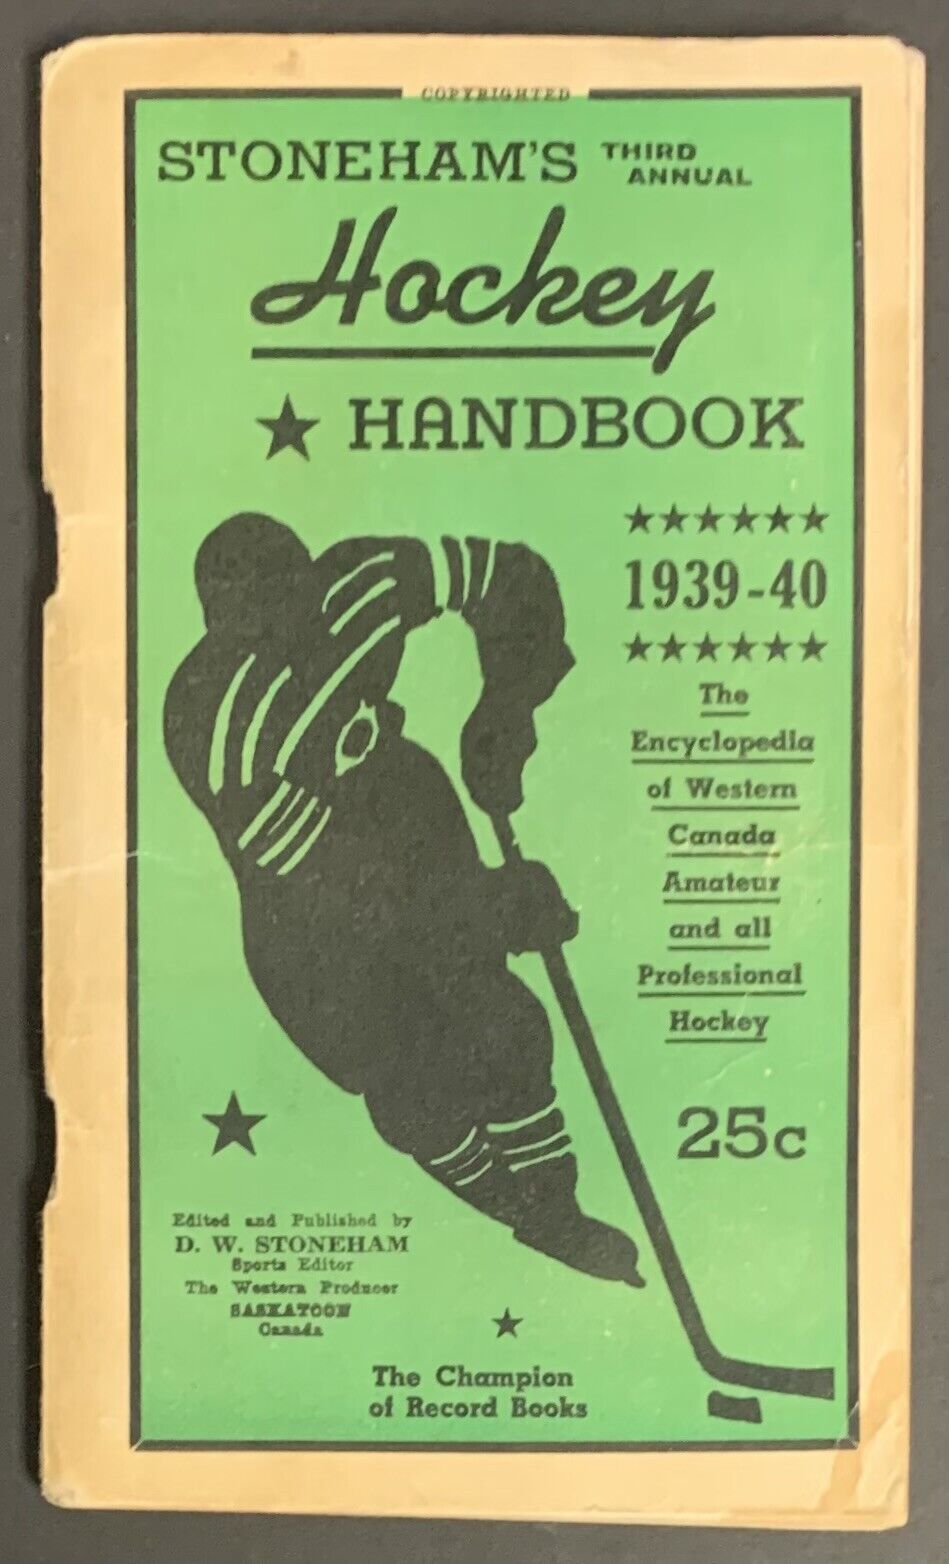 1939-40 3rd Annual Stoneham's Hockey Guide Covering All Pro Leagues + Canada